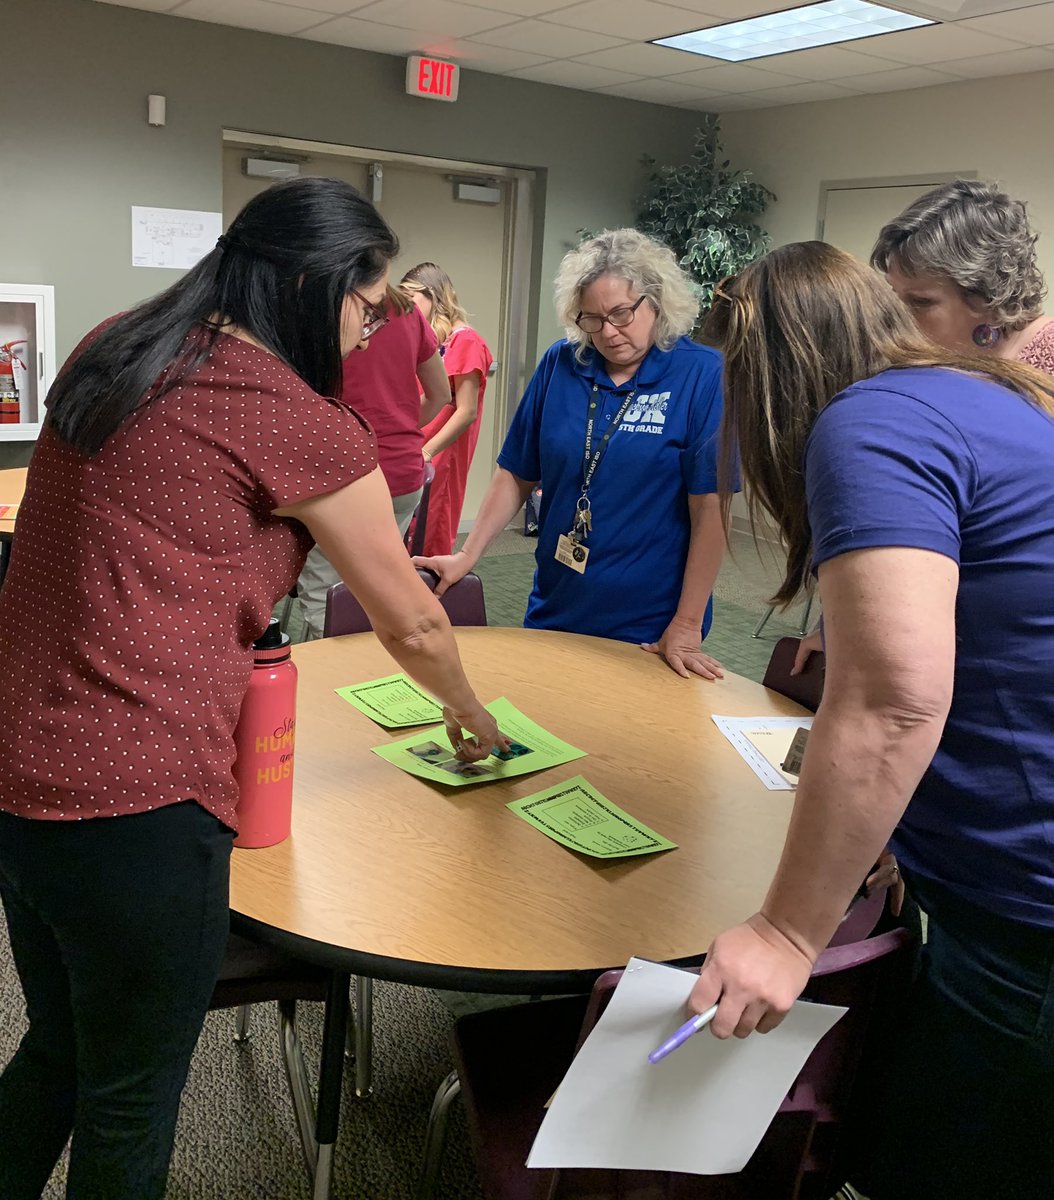 Kudos to our science coaches for assisting with 5th grade teachers at the STAAR review Mission Possible. Super Secret Agents rocked their mission!   #discoverNEISD 
#theneisdway
#neisd_science #STAARreview